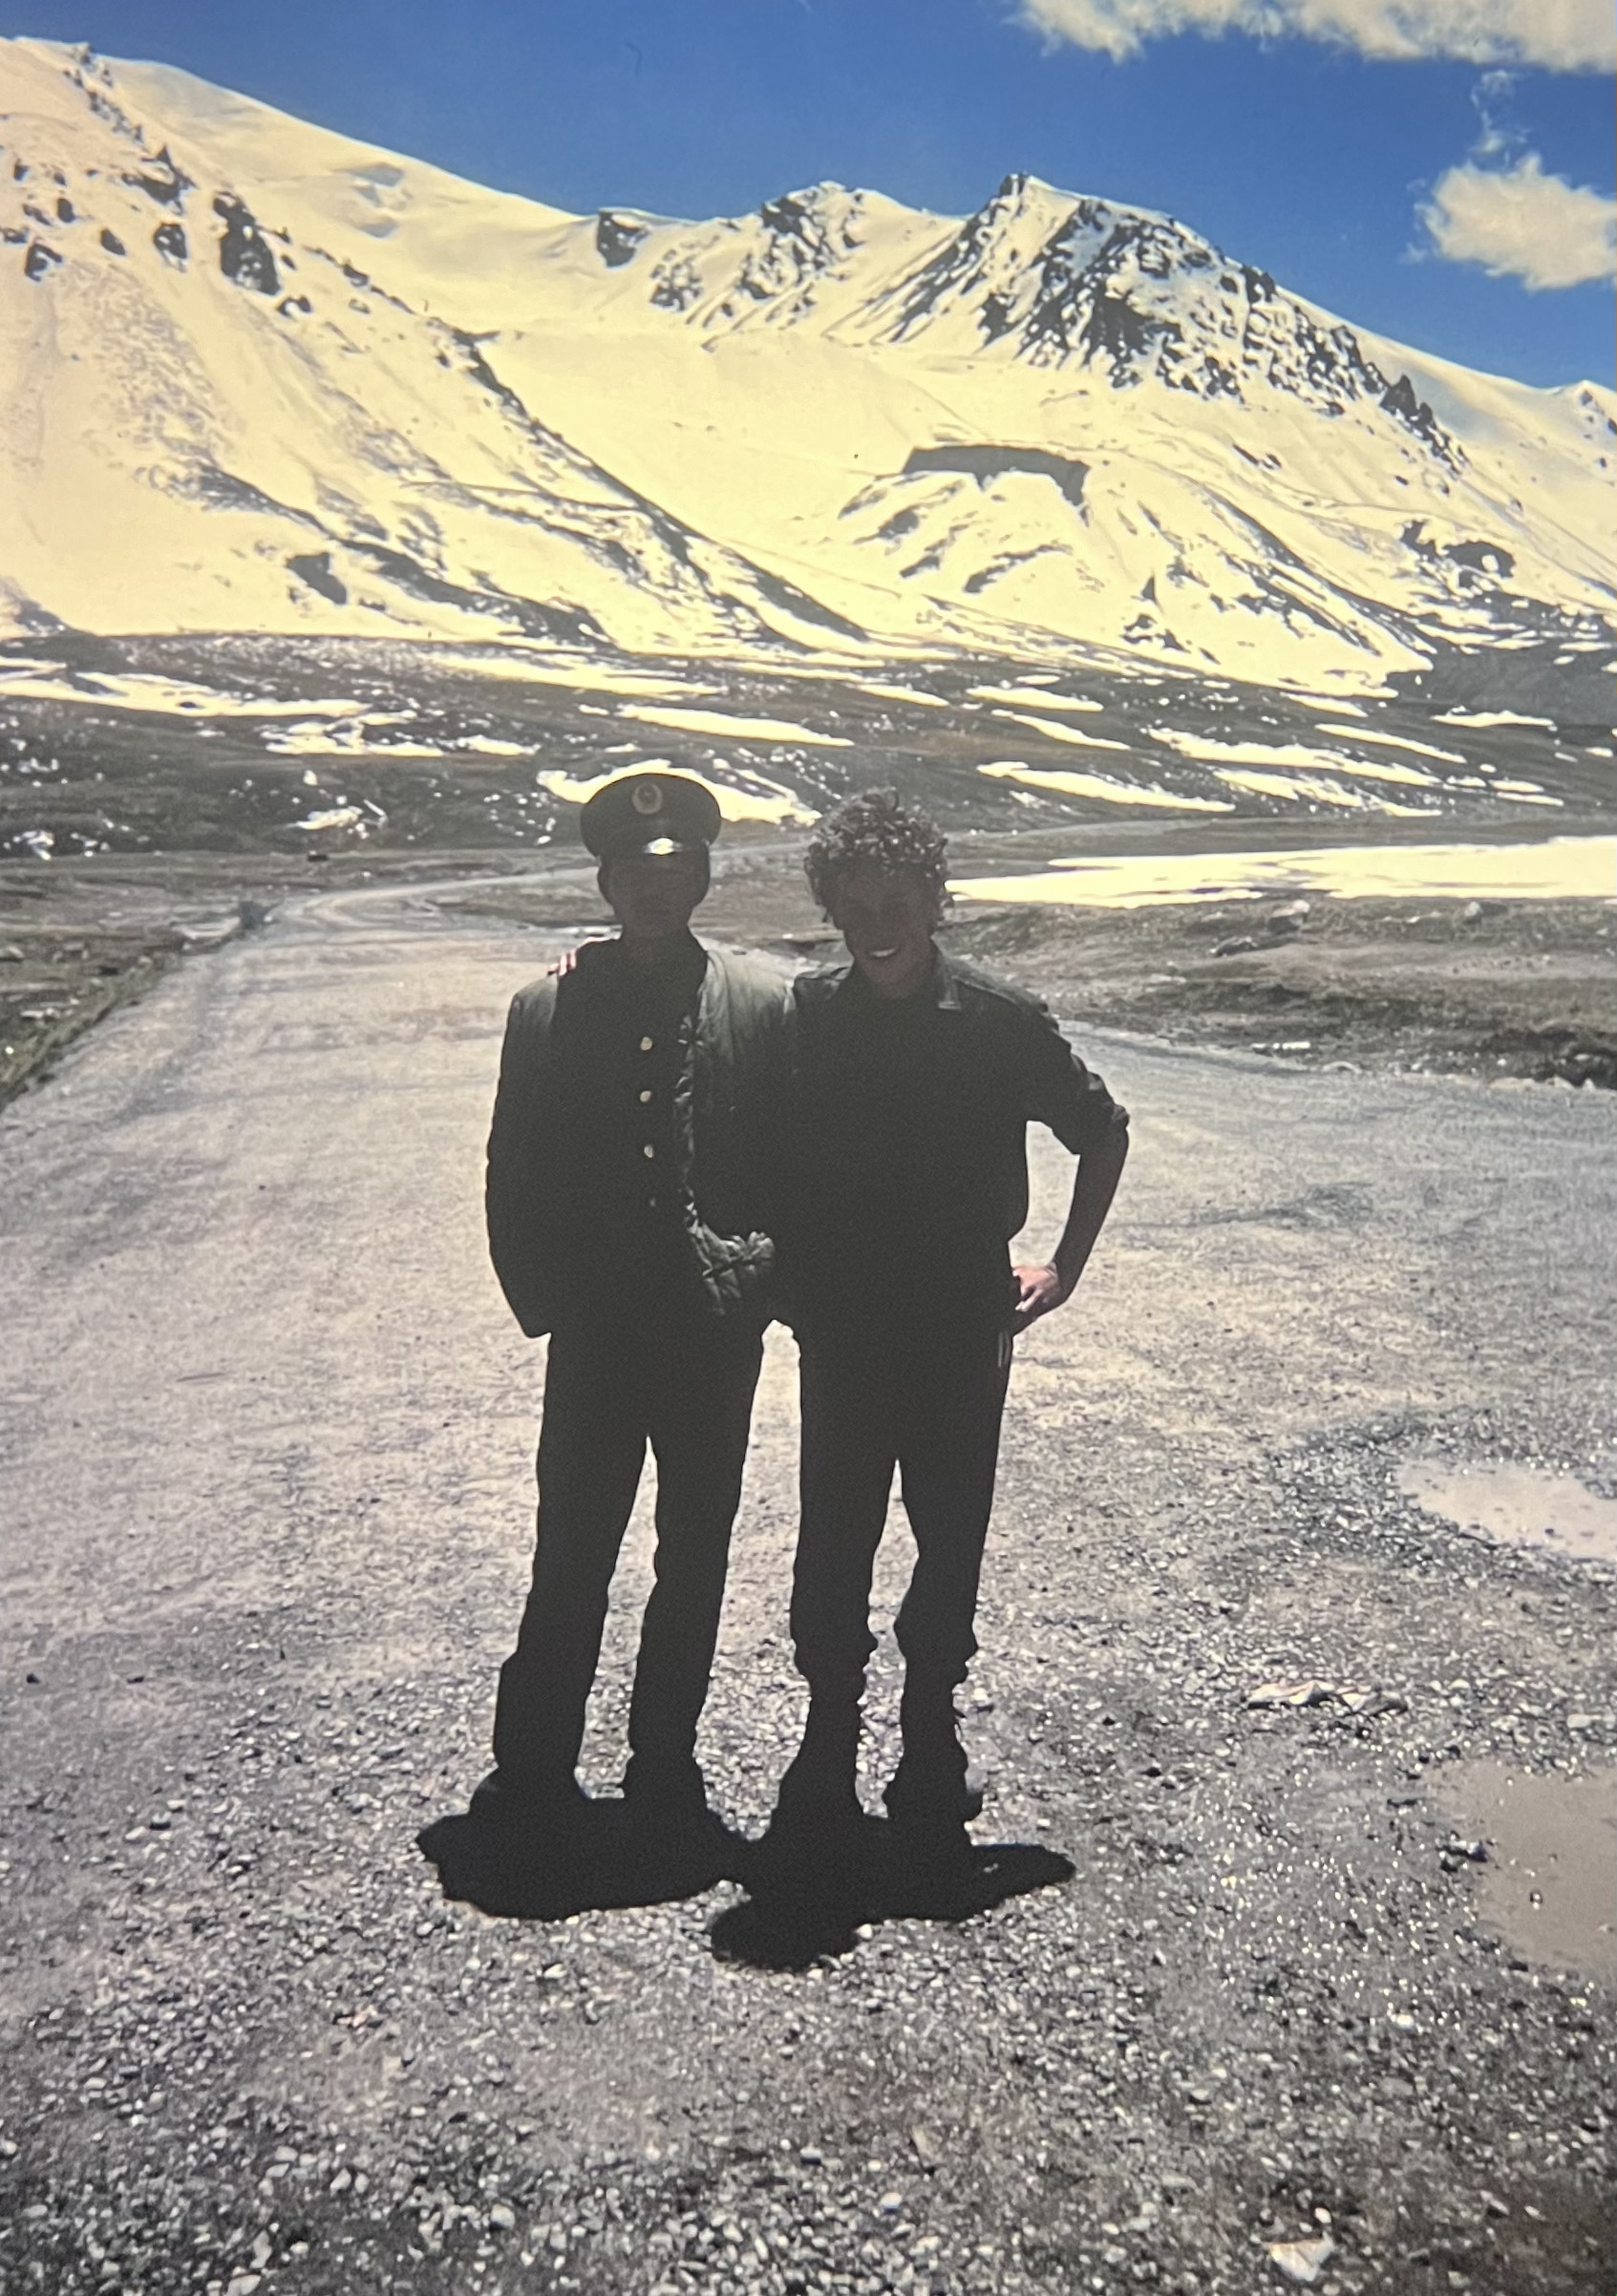 My arm around a Chinese guard at the Khunjerab pass. Standing on the highway, a single lane road, with the snow covered mountains behind us